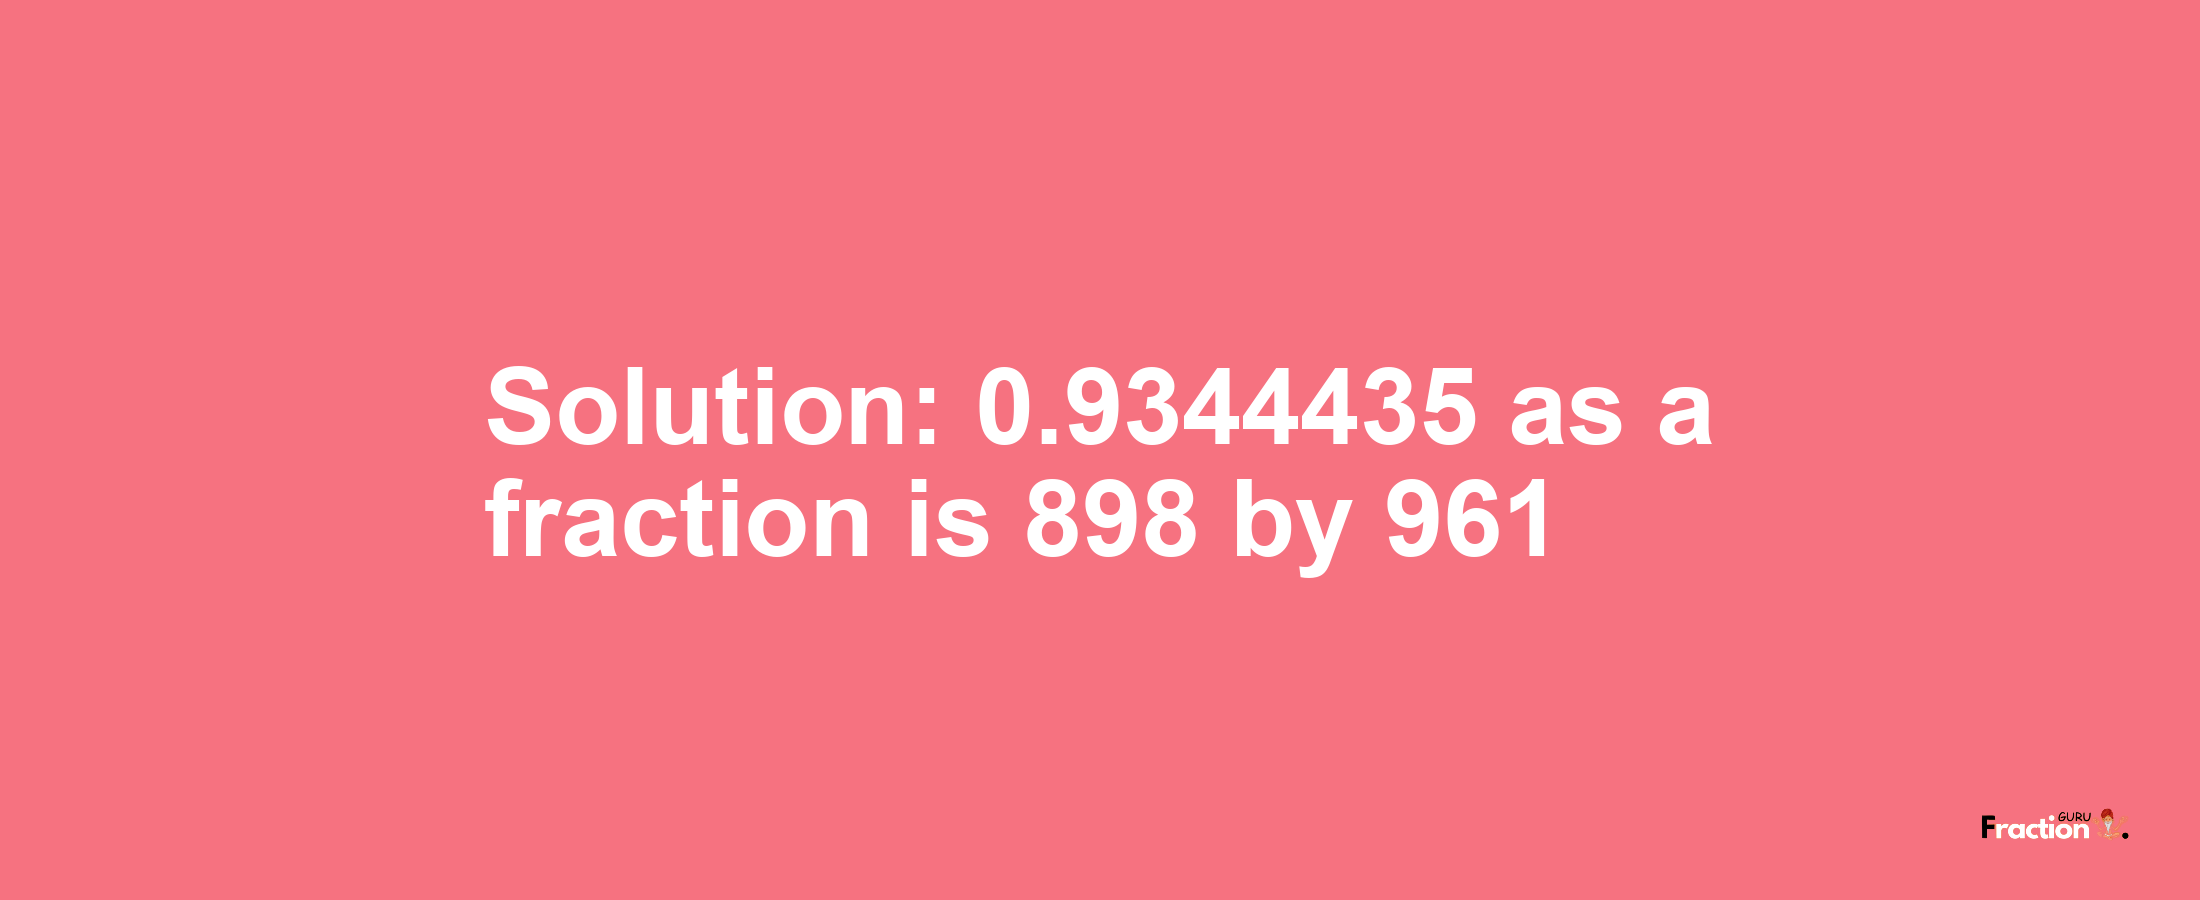 Solution:0.9344435 as a fraction is 898/961